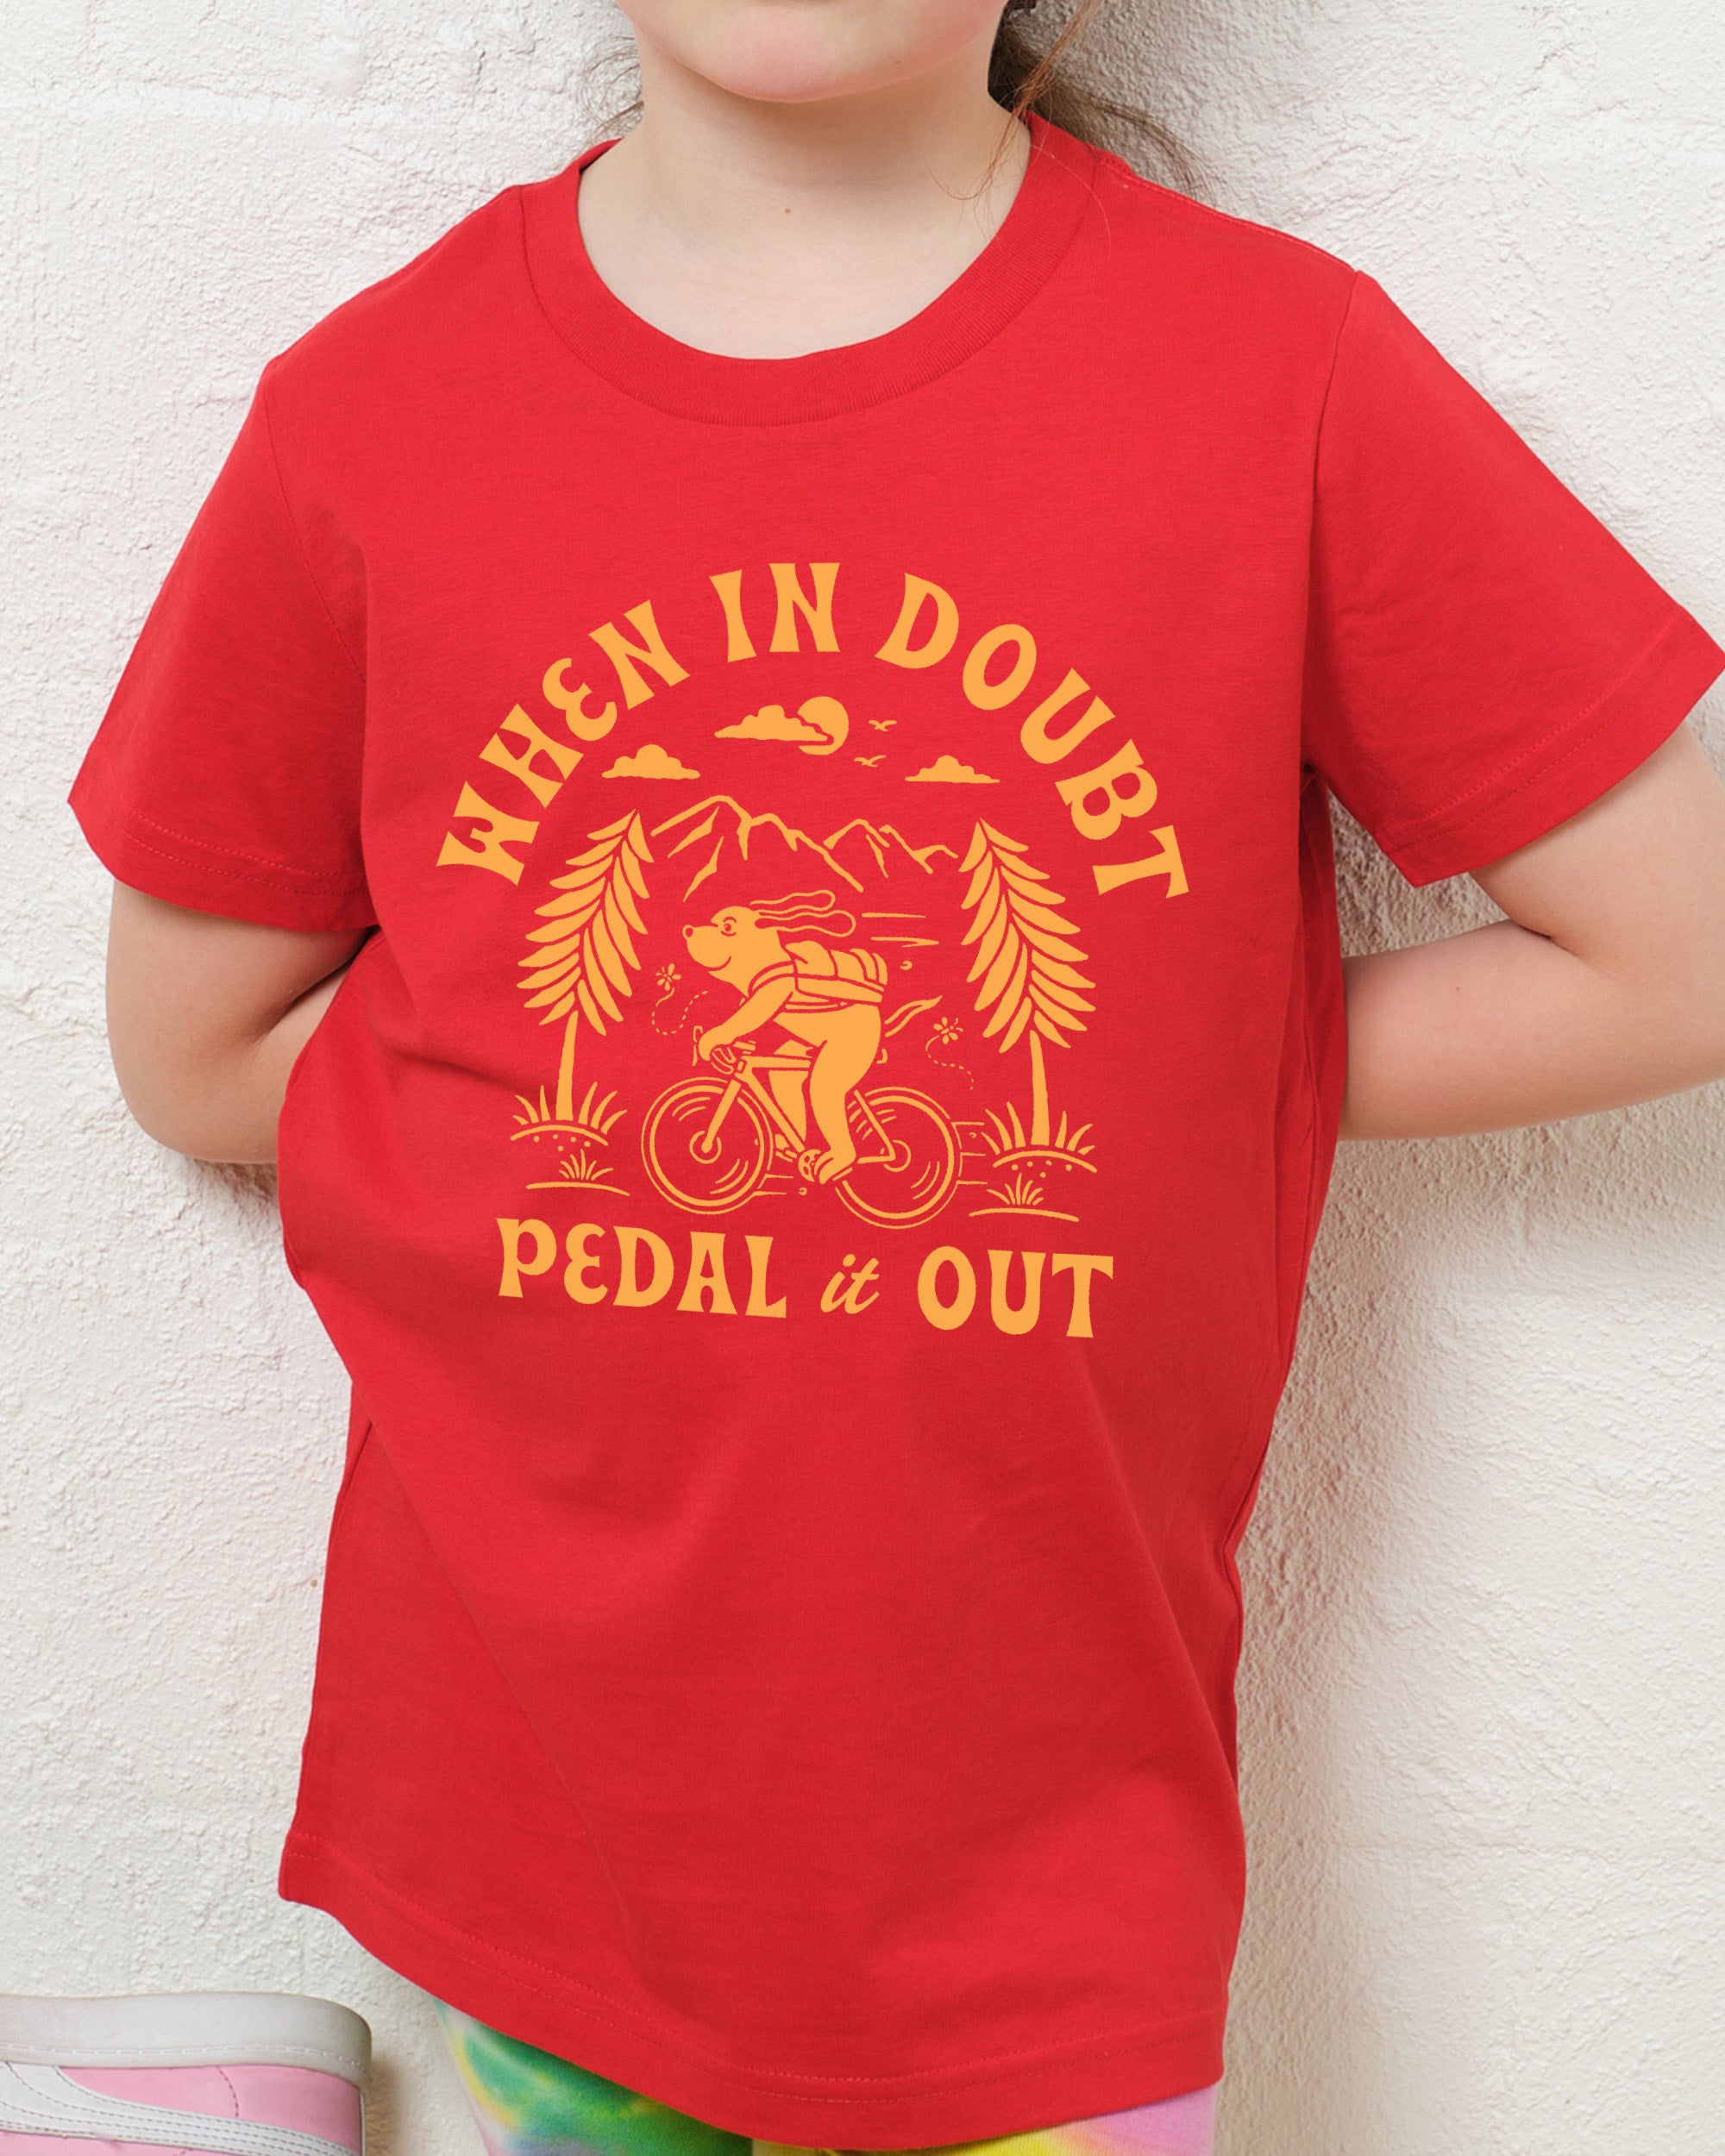 When In Doubt Pedal It Out Kids T-Shirt